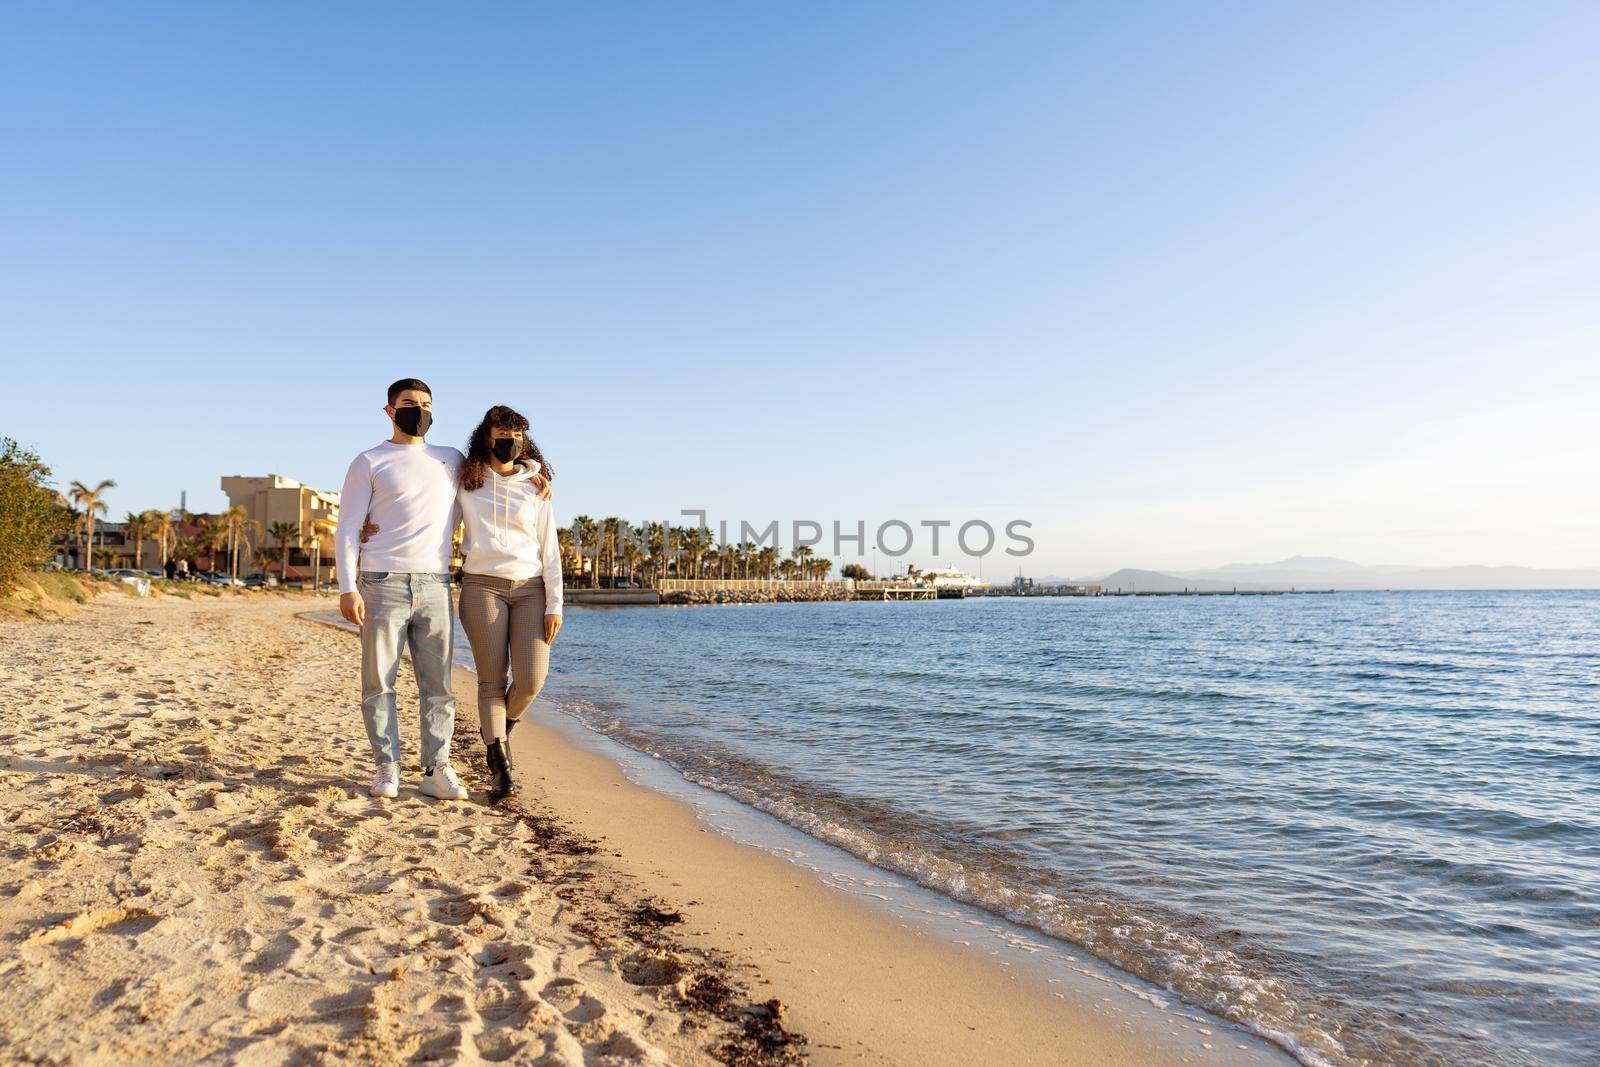 Multiracial couple of young millennials in love embracing each other while walking by the ocean seaside at sunset or sunrise wearing protective face mask against Coronavirus in new normal vacations